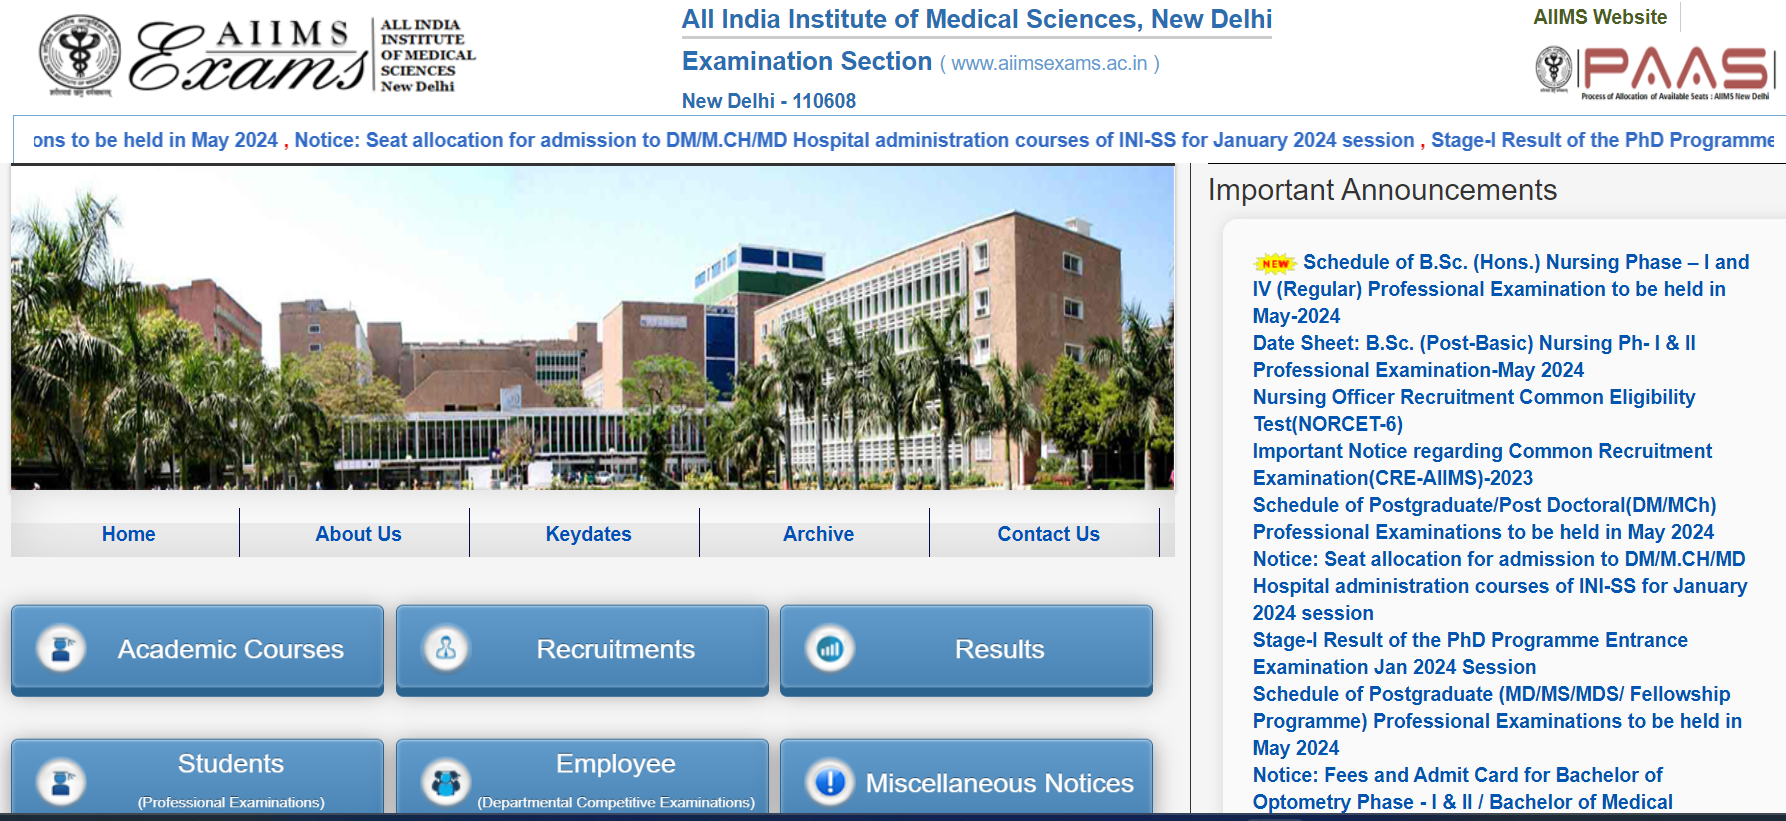 AIIMS NORCET 6 IMAGE SIZE AND THUMB SIZE INSTRUCTIONS